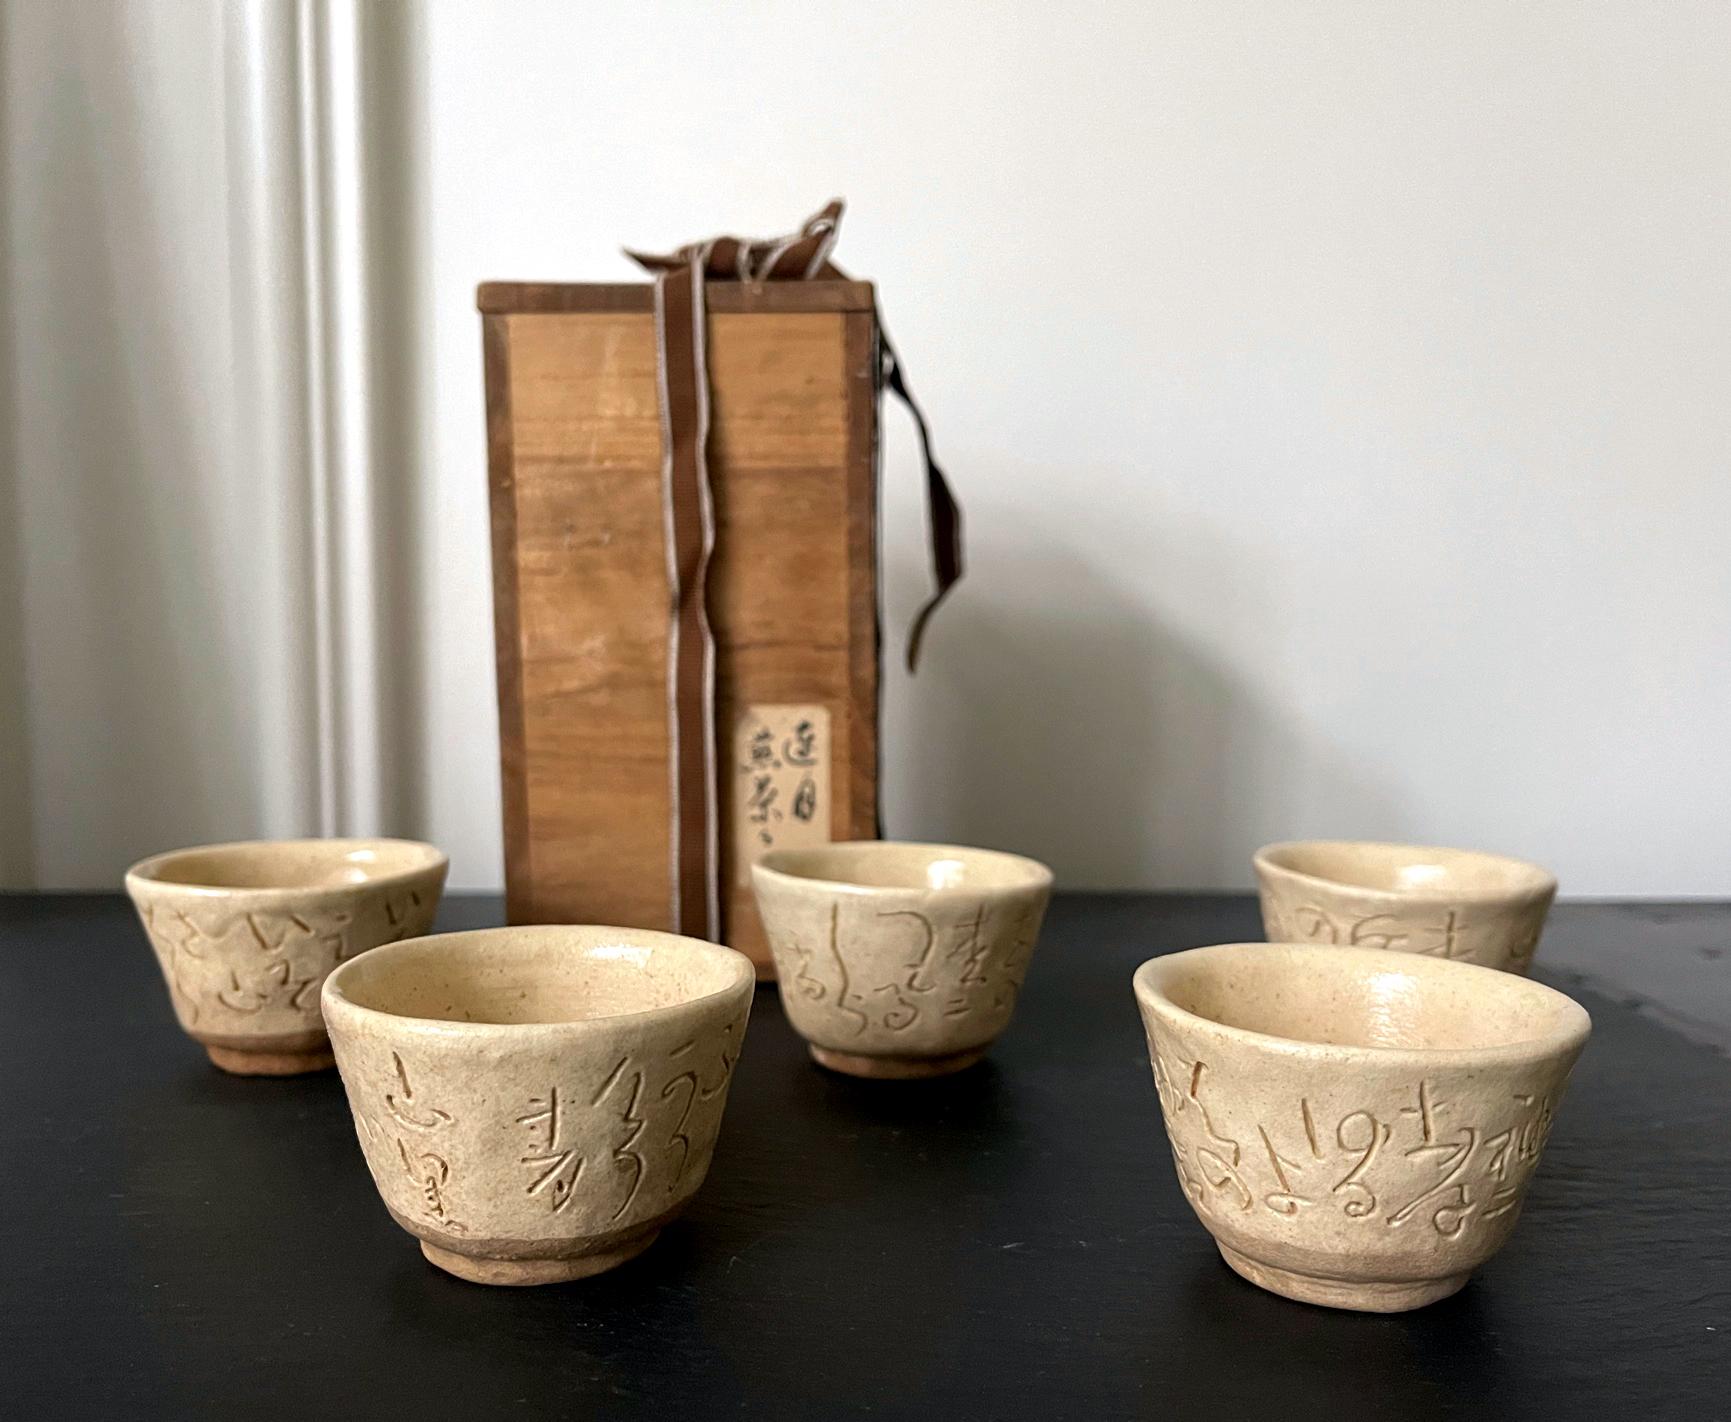 A set of five stoneware sencha tea cups by Otagaki Rengetsu (1791-1875). These miniature cups were simply molded in the classic form, glazed in off white and incised with cursive waka poems, a signature decorative style by the artist. Accompanies